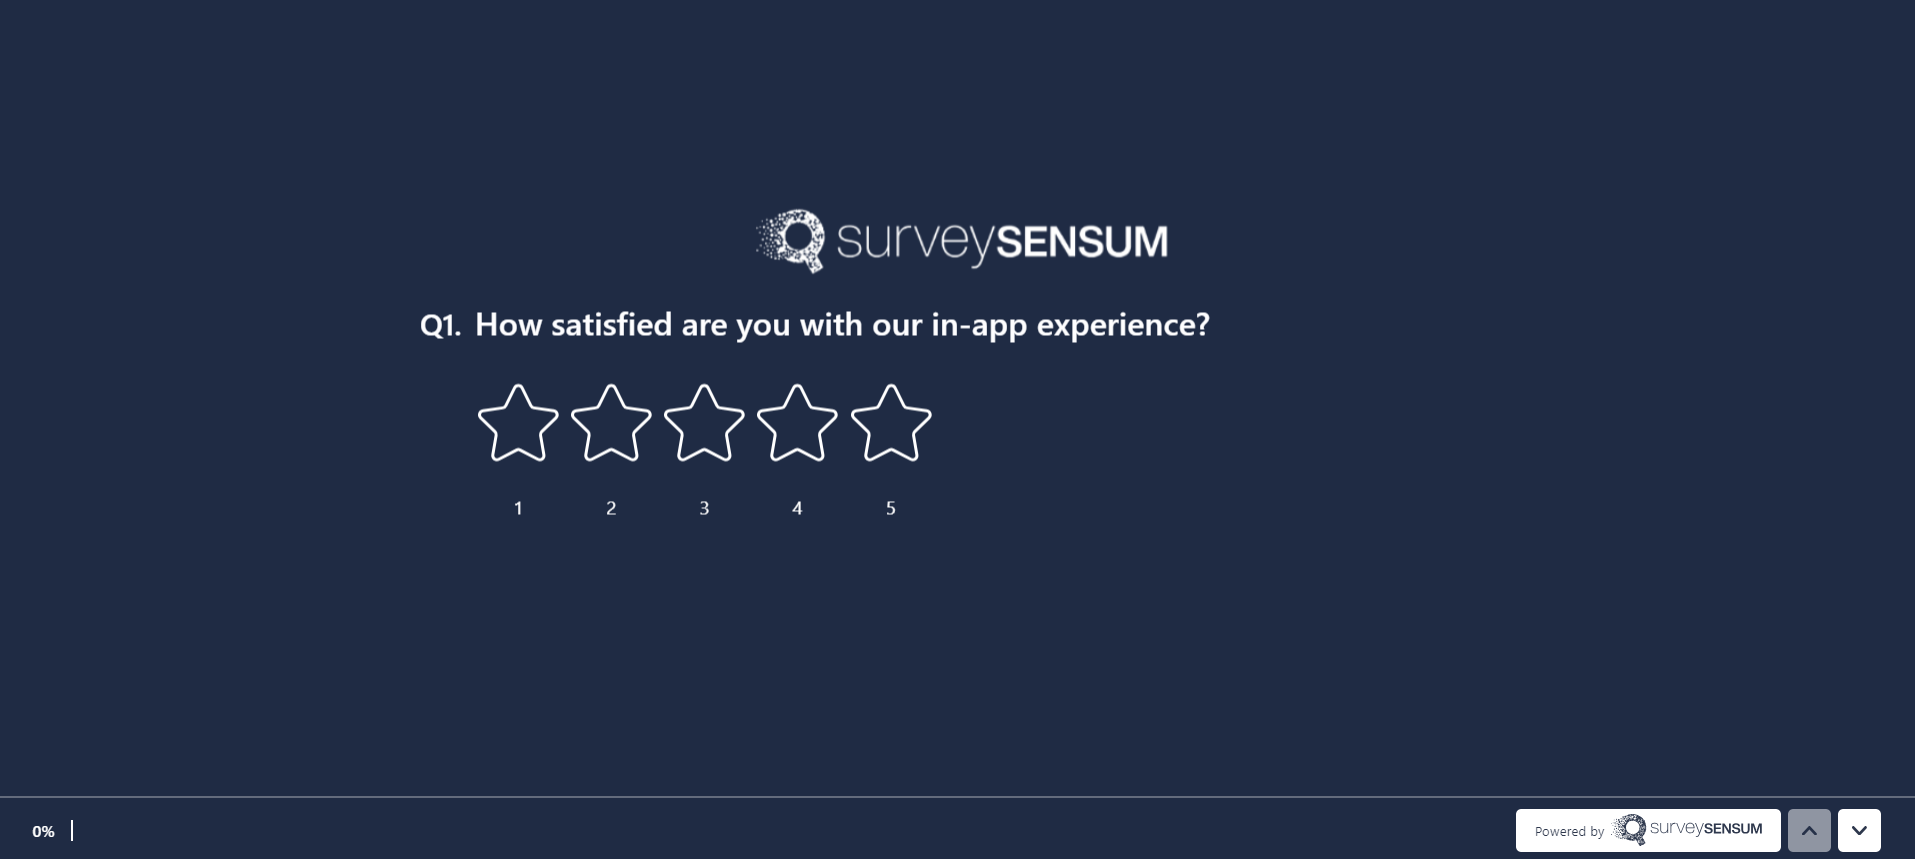 This is the image of a survey with a Rating survey type. 